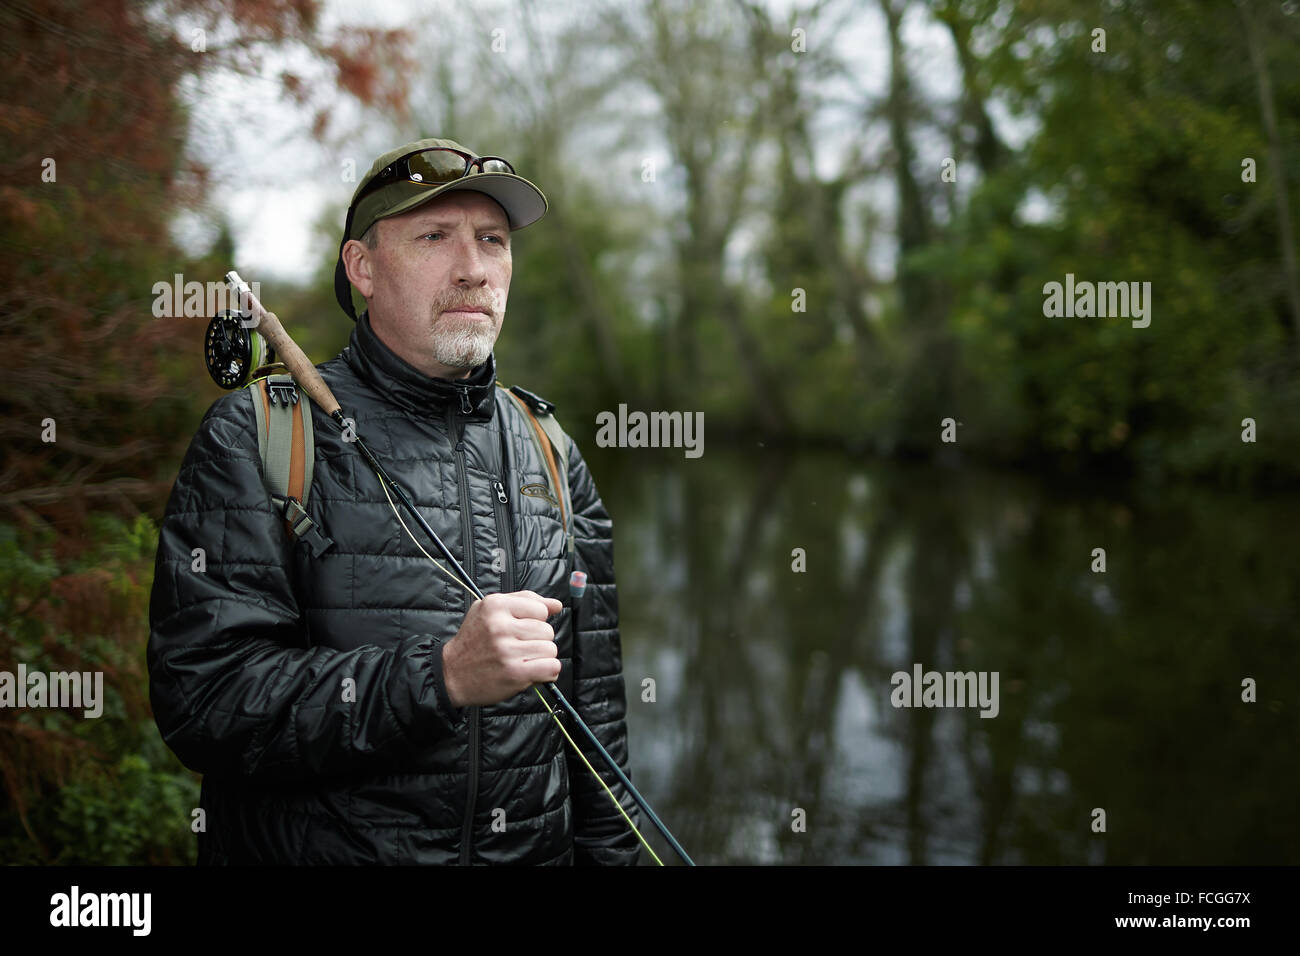 A man fly fishing in a river Stock Photo